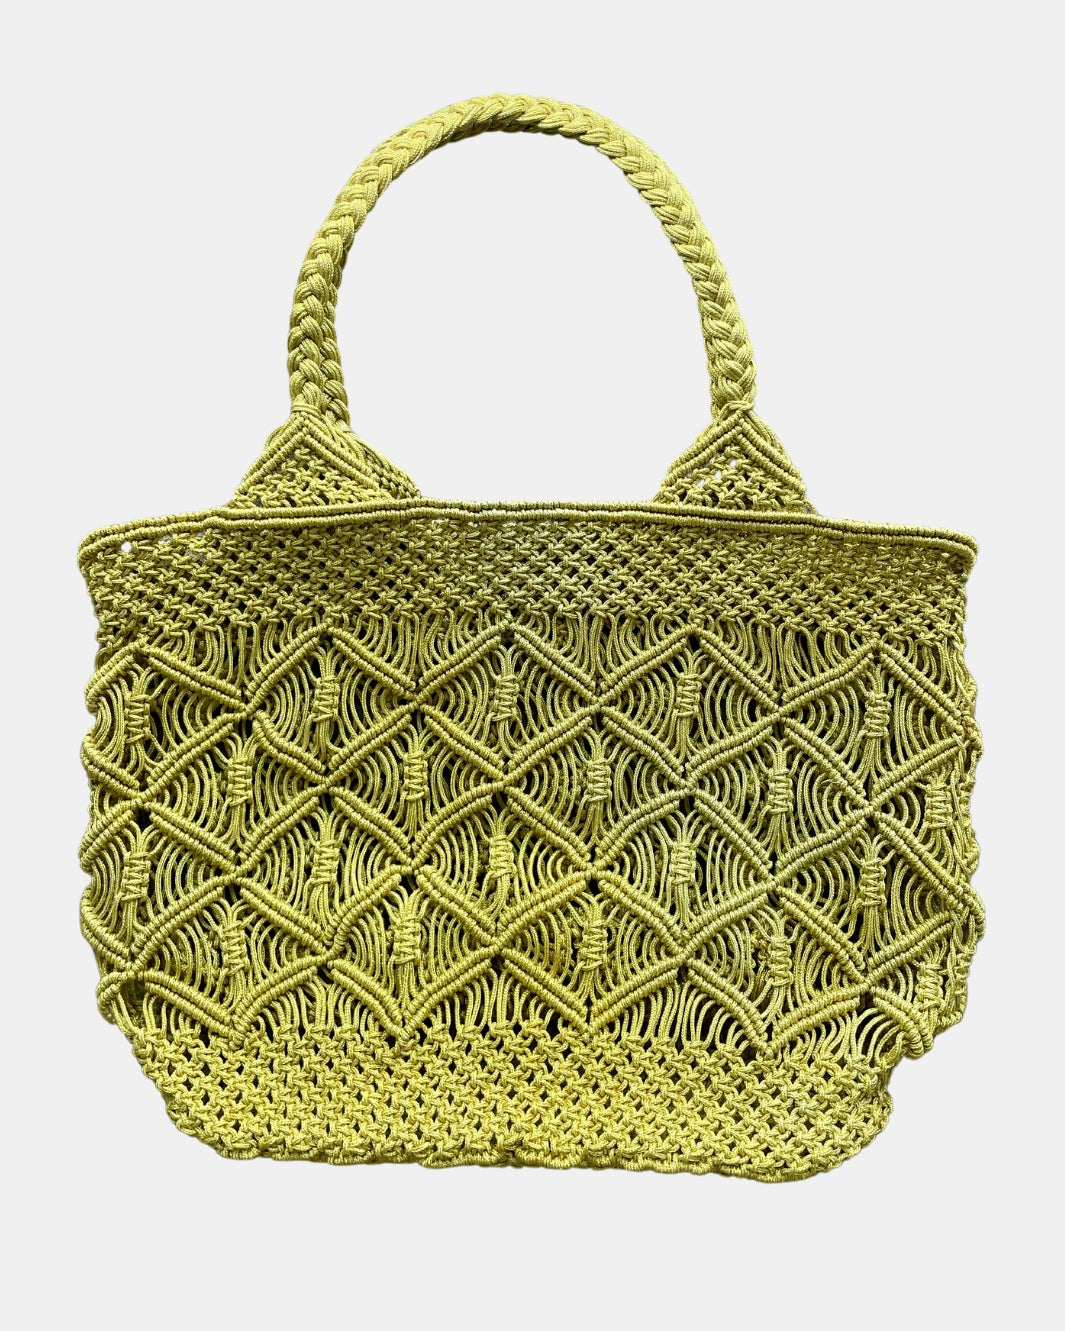 BASKET MACRAME TOTE IN GOLD - Romi Boutique